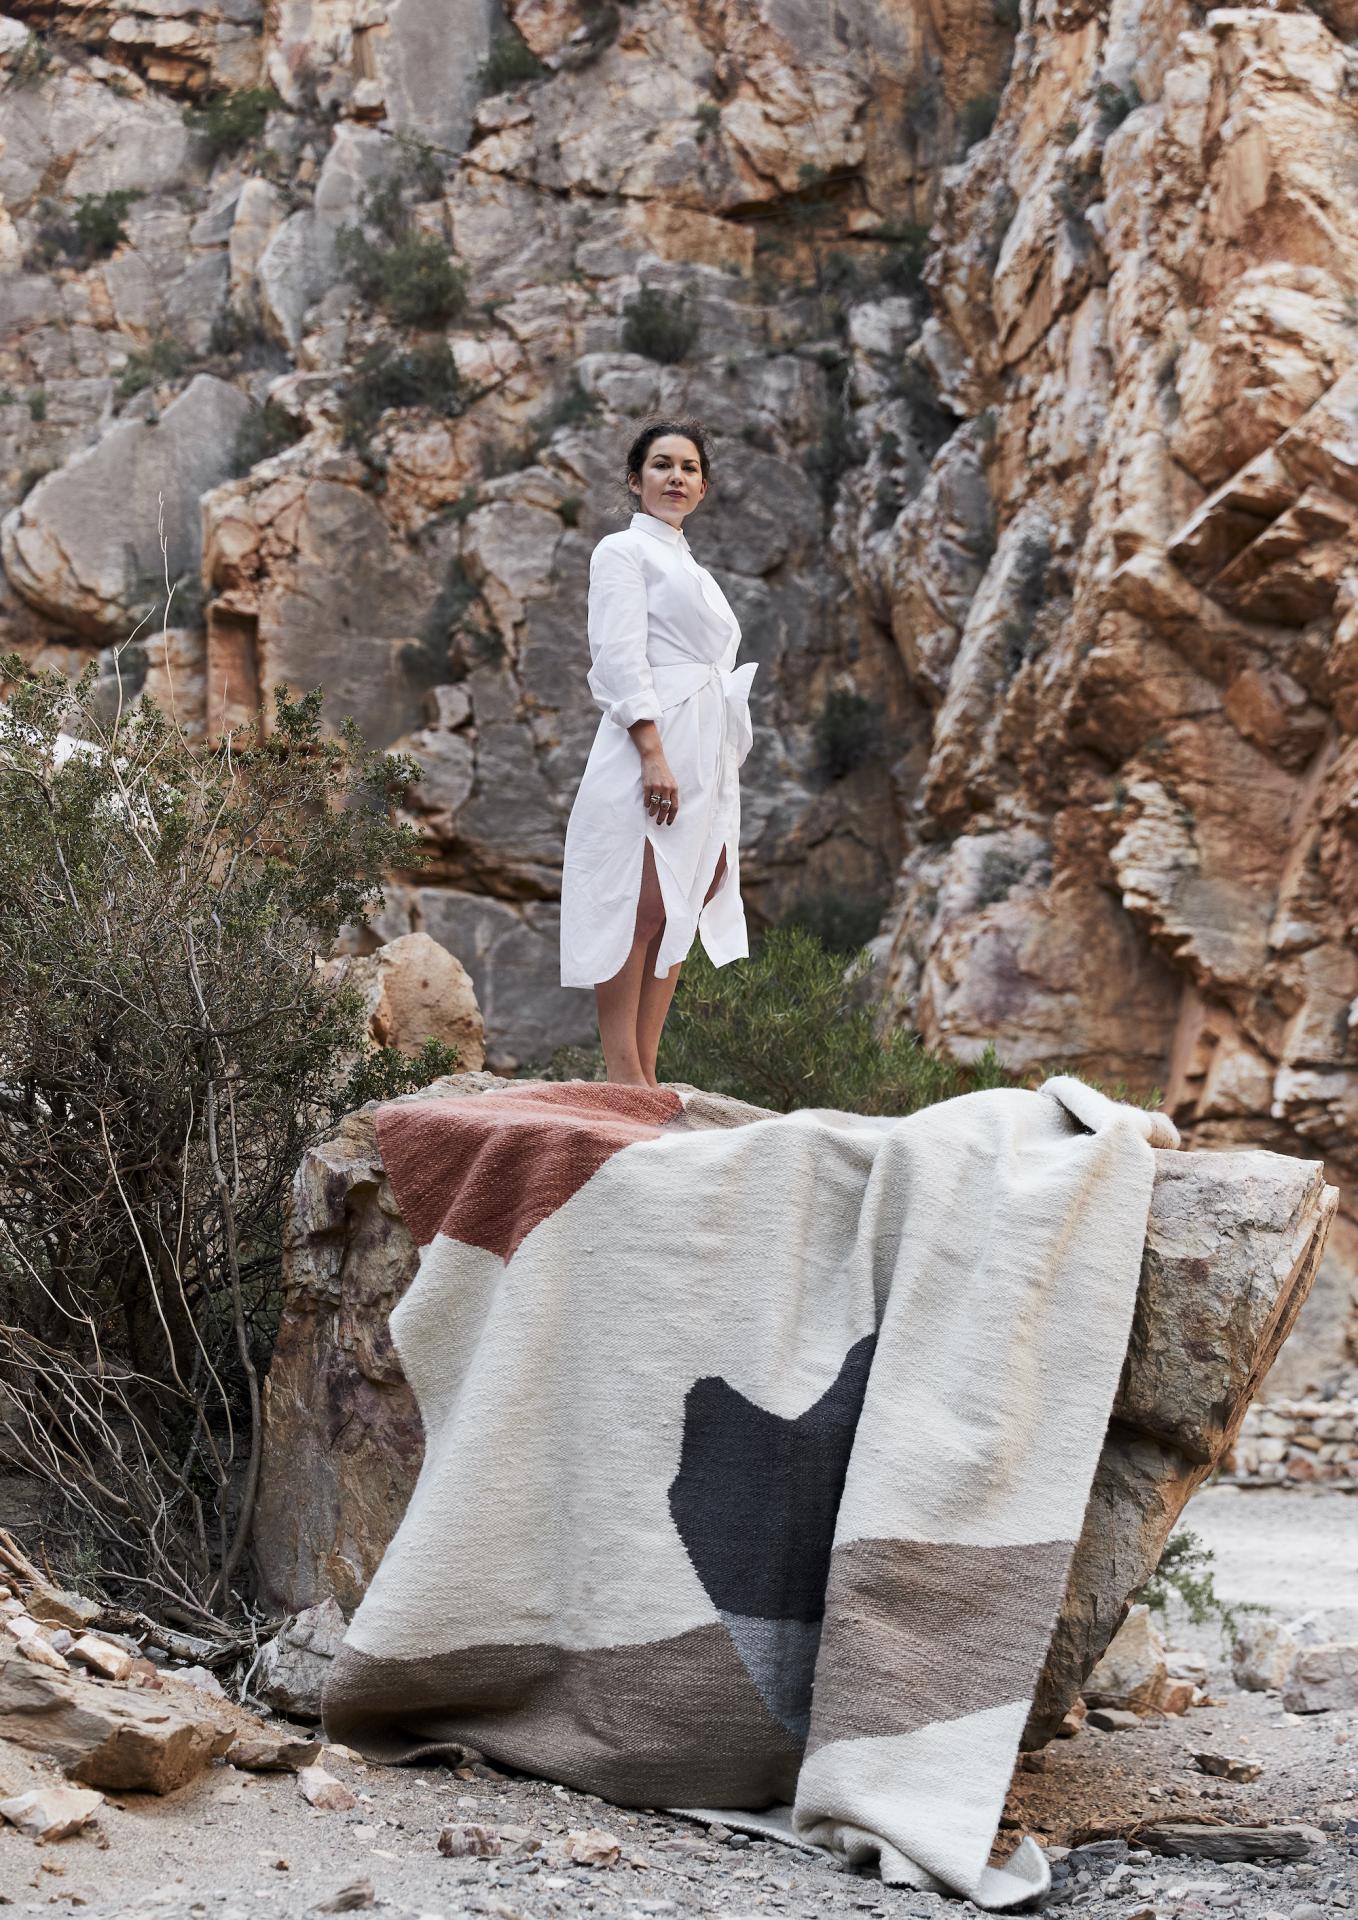 Special Thread: Mohair Rugs That Reflect The Uniqueness Of The Karoo Region